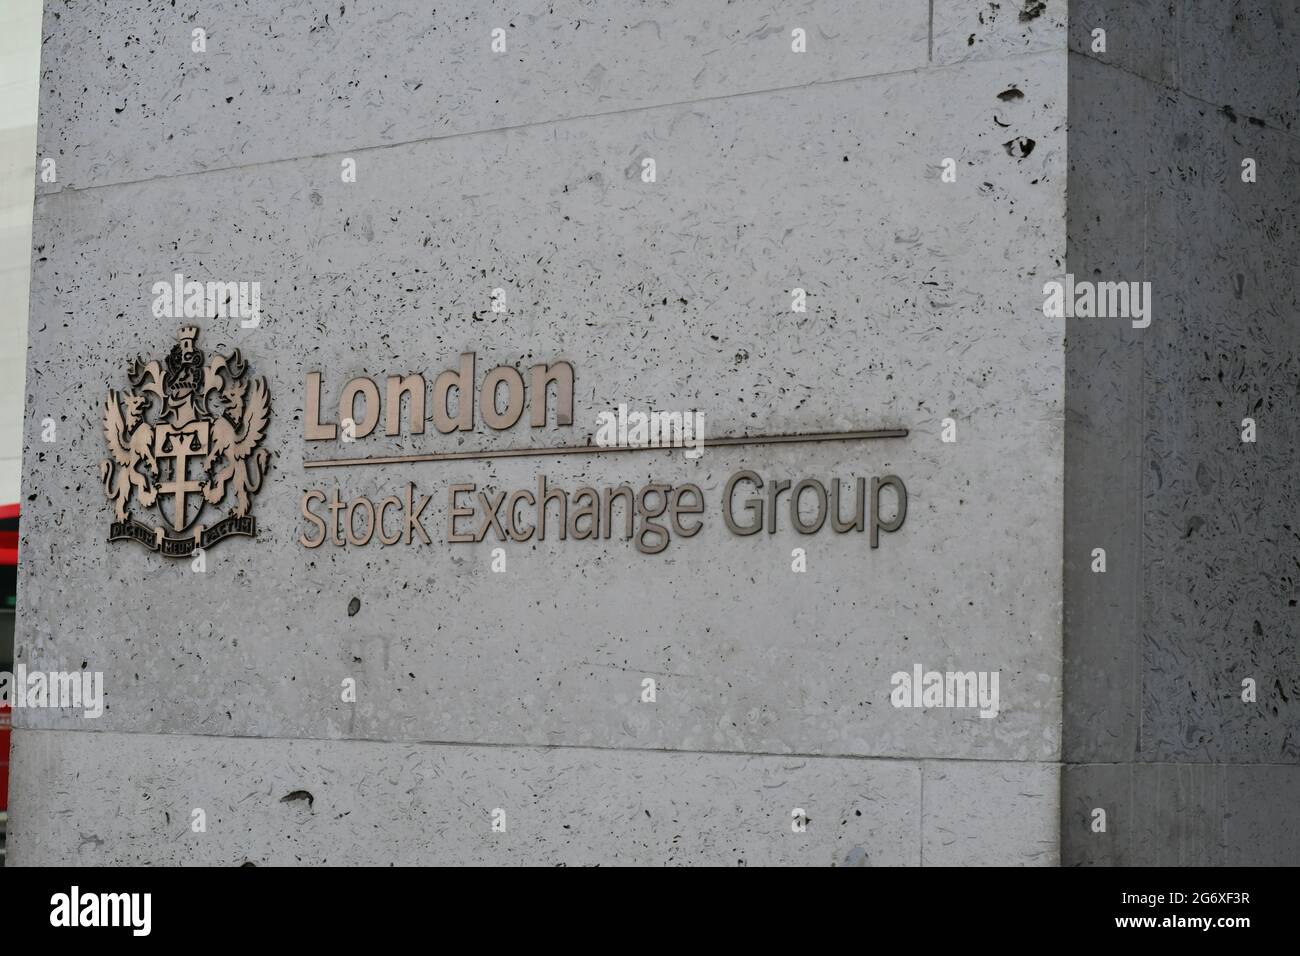 London stock exchange group sign and logo for editorial use Stock Photo